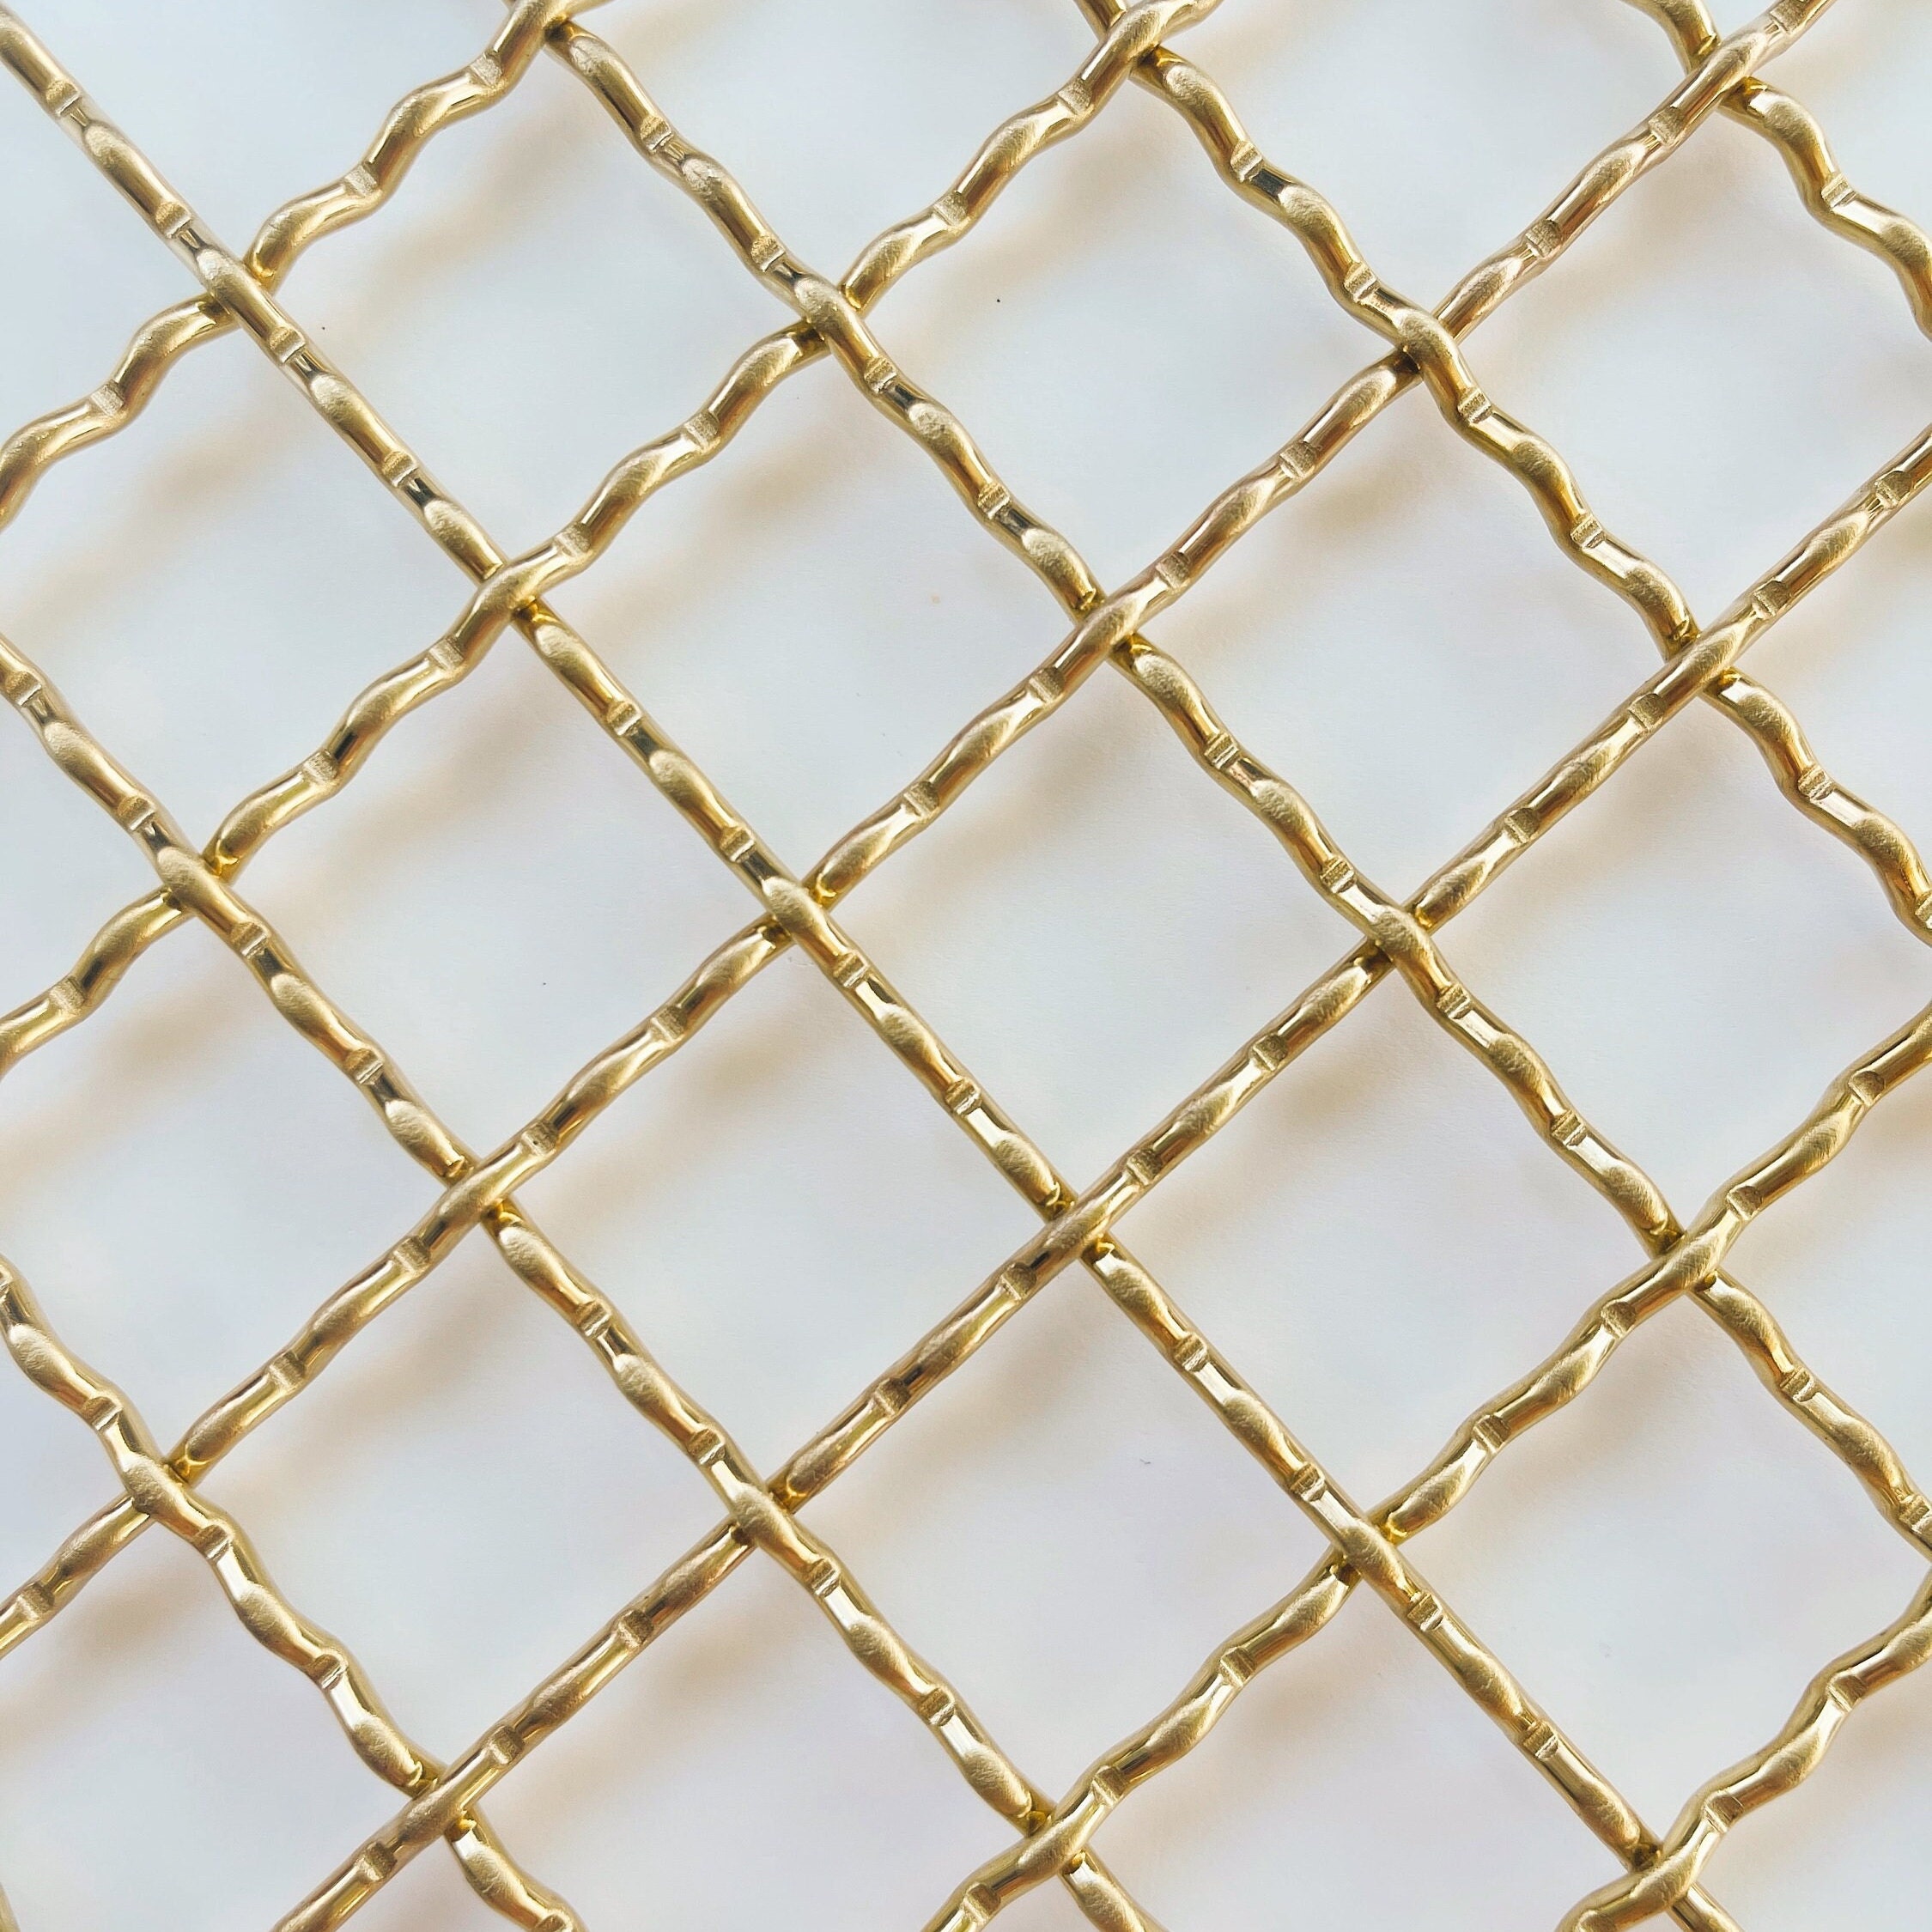 Wire Mesh Antique Brass Finish Furniture and Creative Grille Mesh 